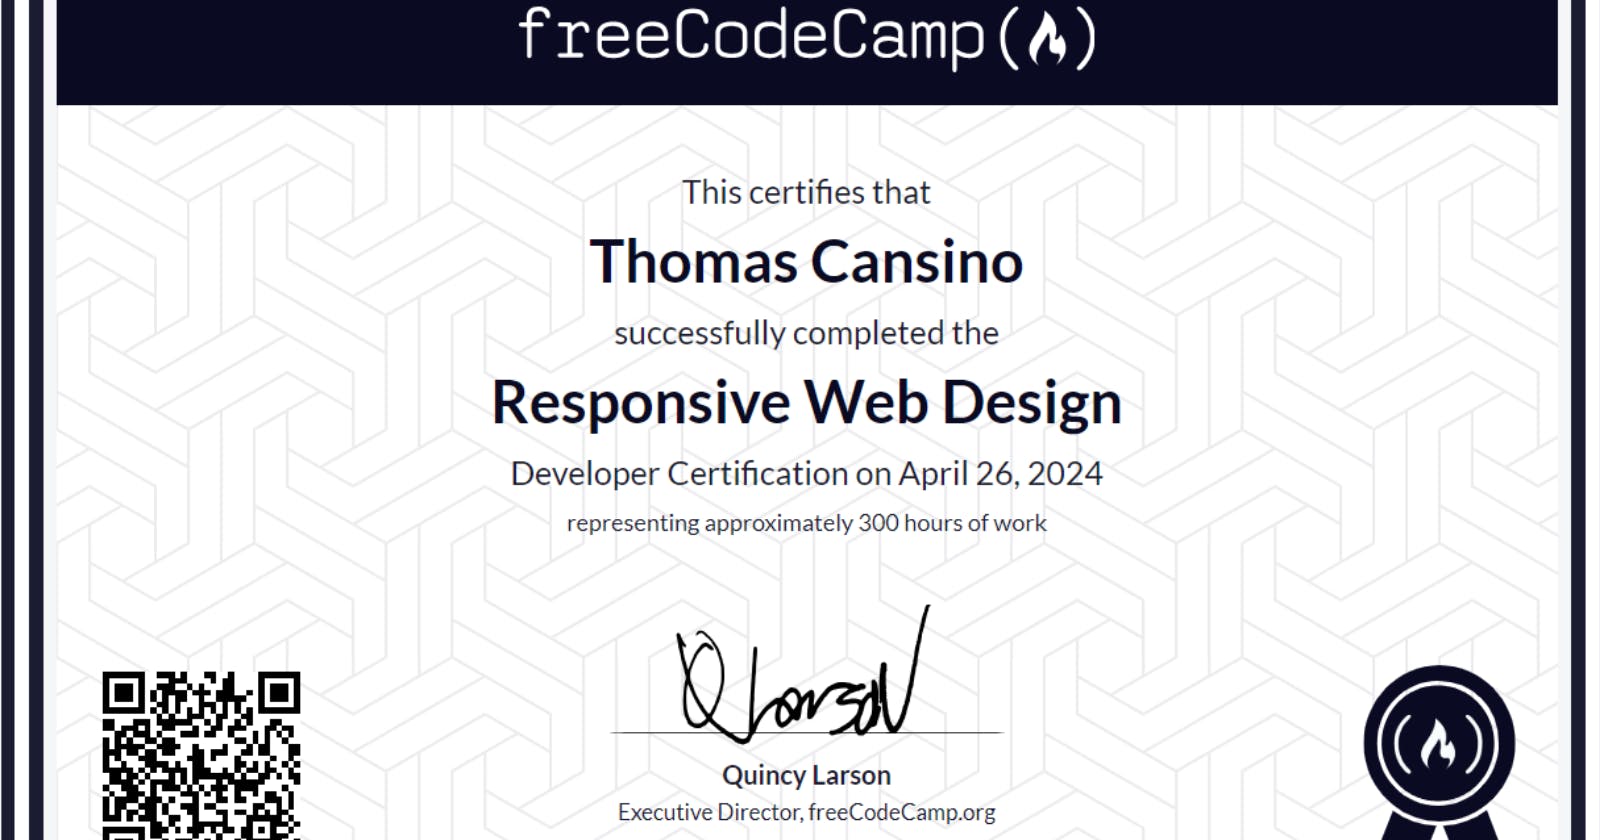 [DAY 15-17] I Got My First Web Dev Certification & Started Learning Javascript